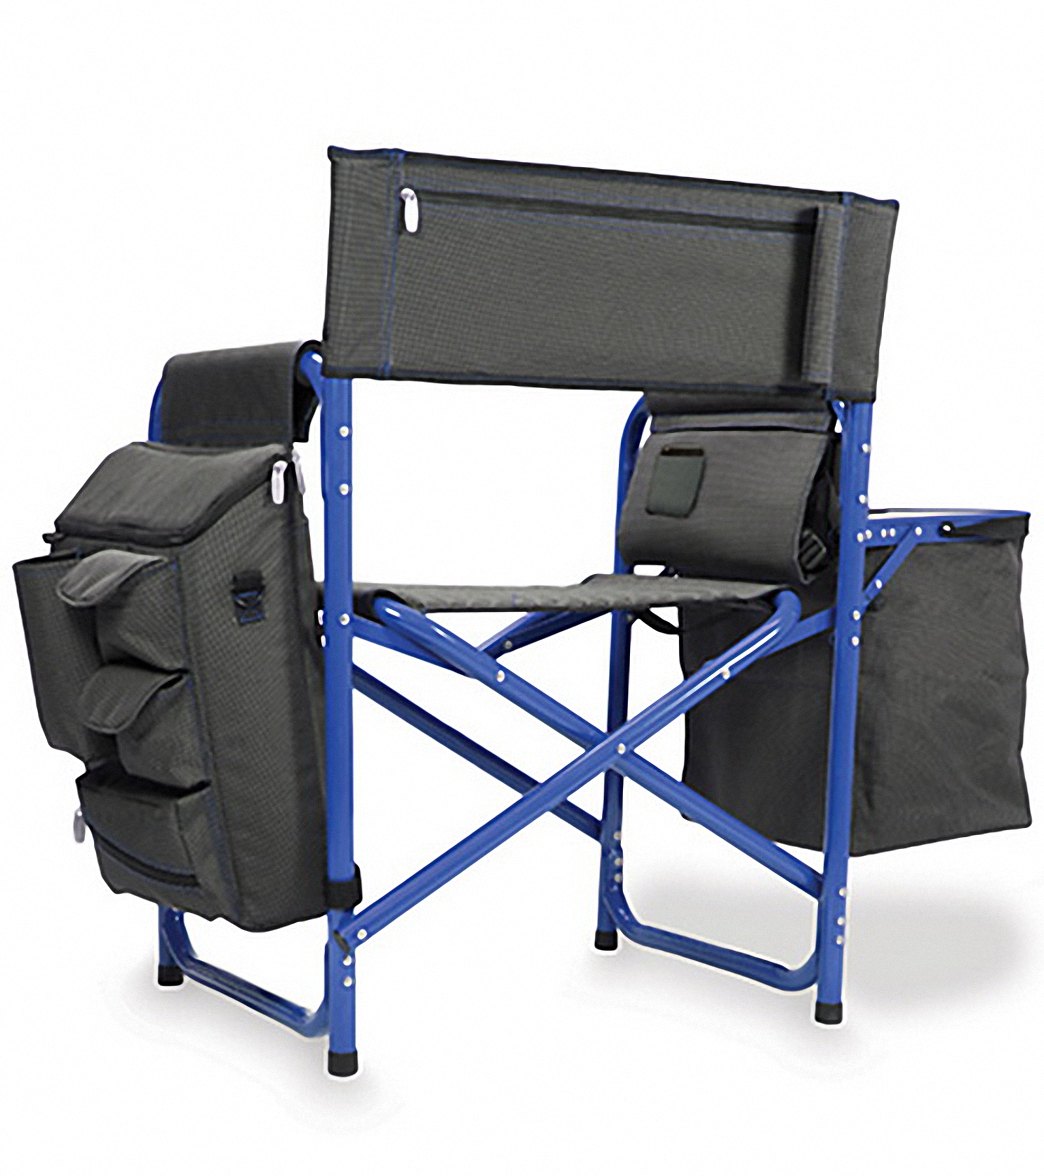 Picnic Time Picnic Fusion Backpack Cooler Chair